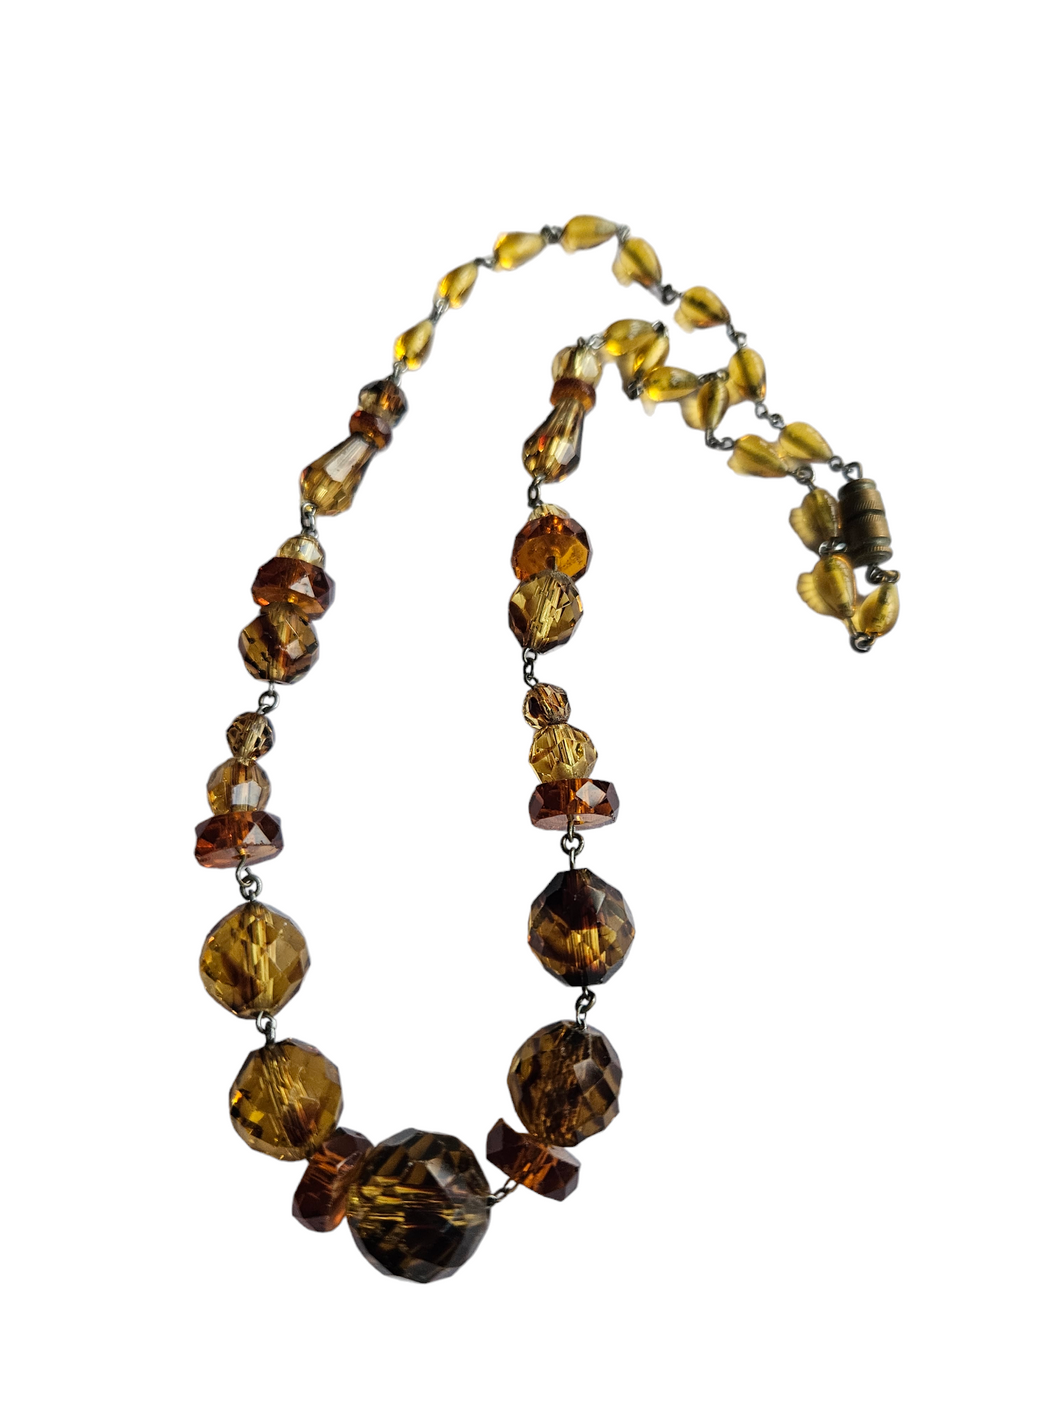 1930s Tiger Effect Glass Necklace